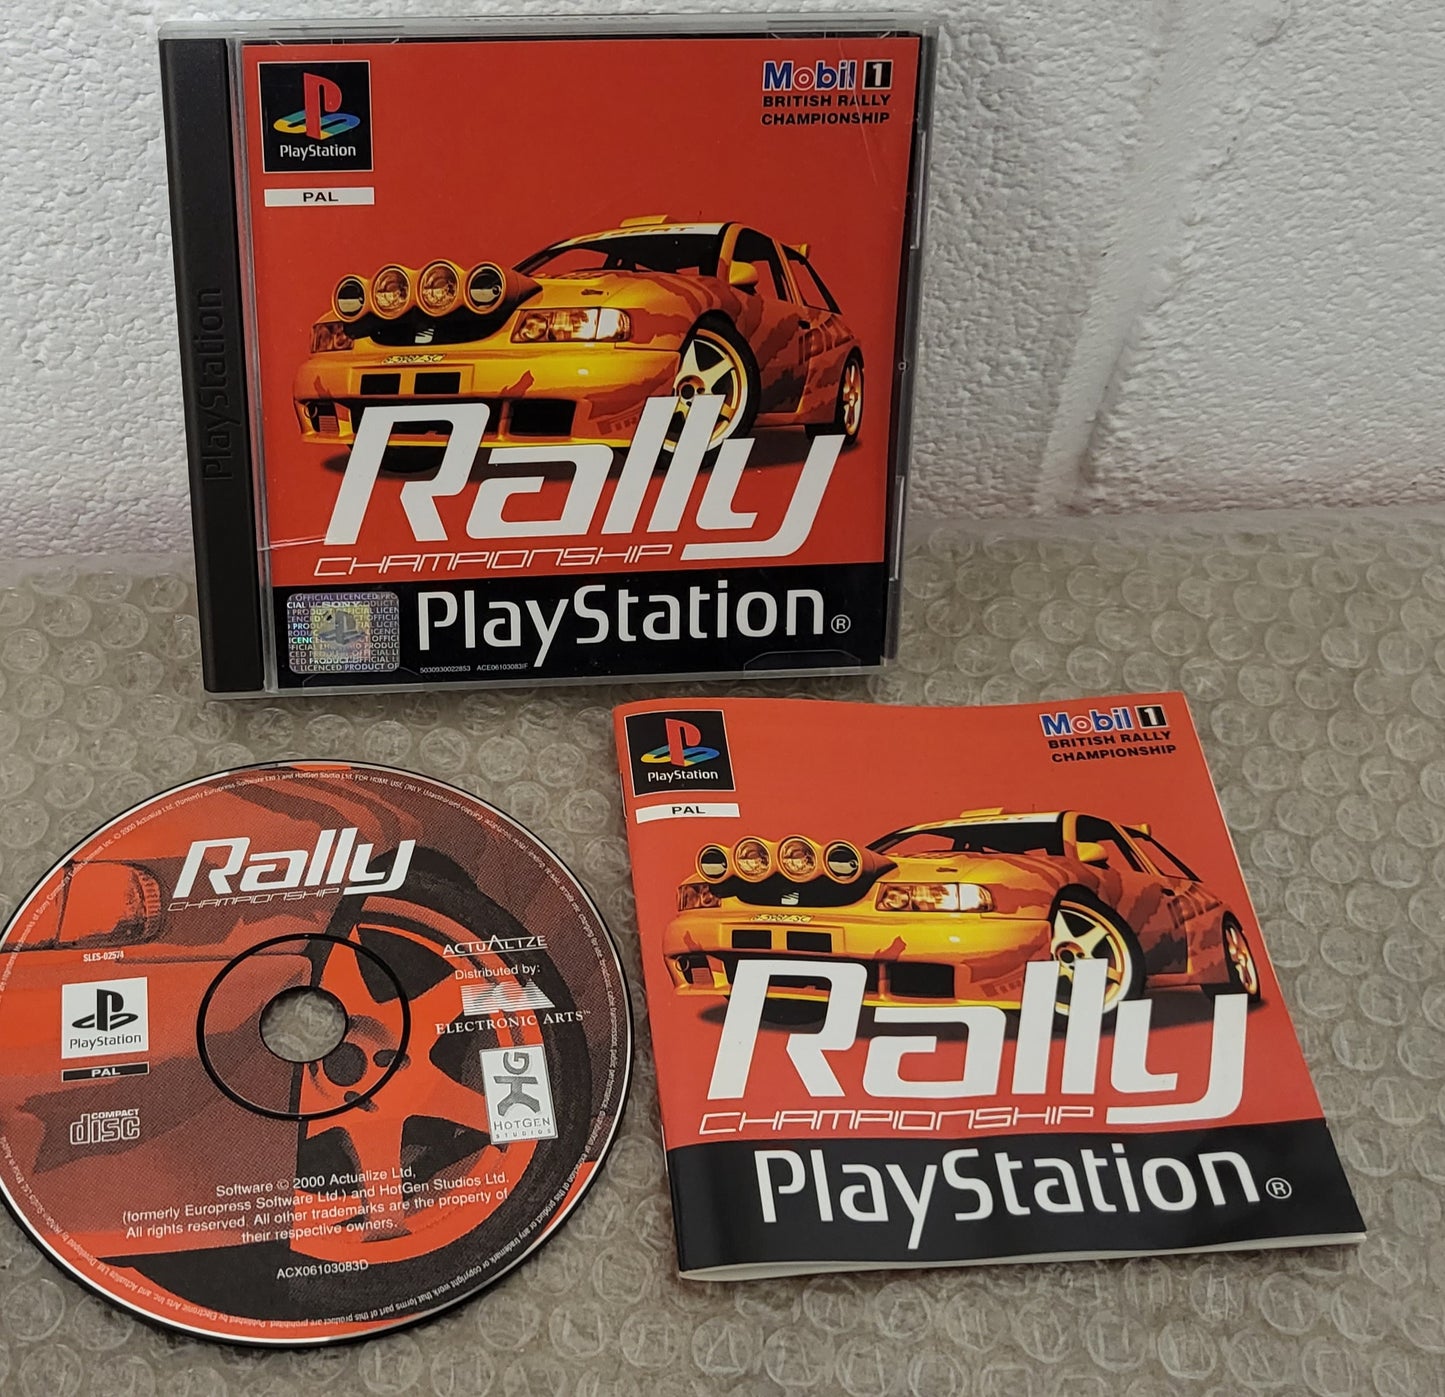 Mobil 1 Rally Championship Sony Playstation 1 (PS1) Game